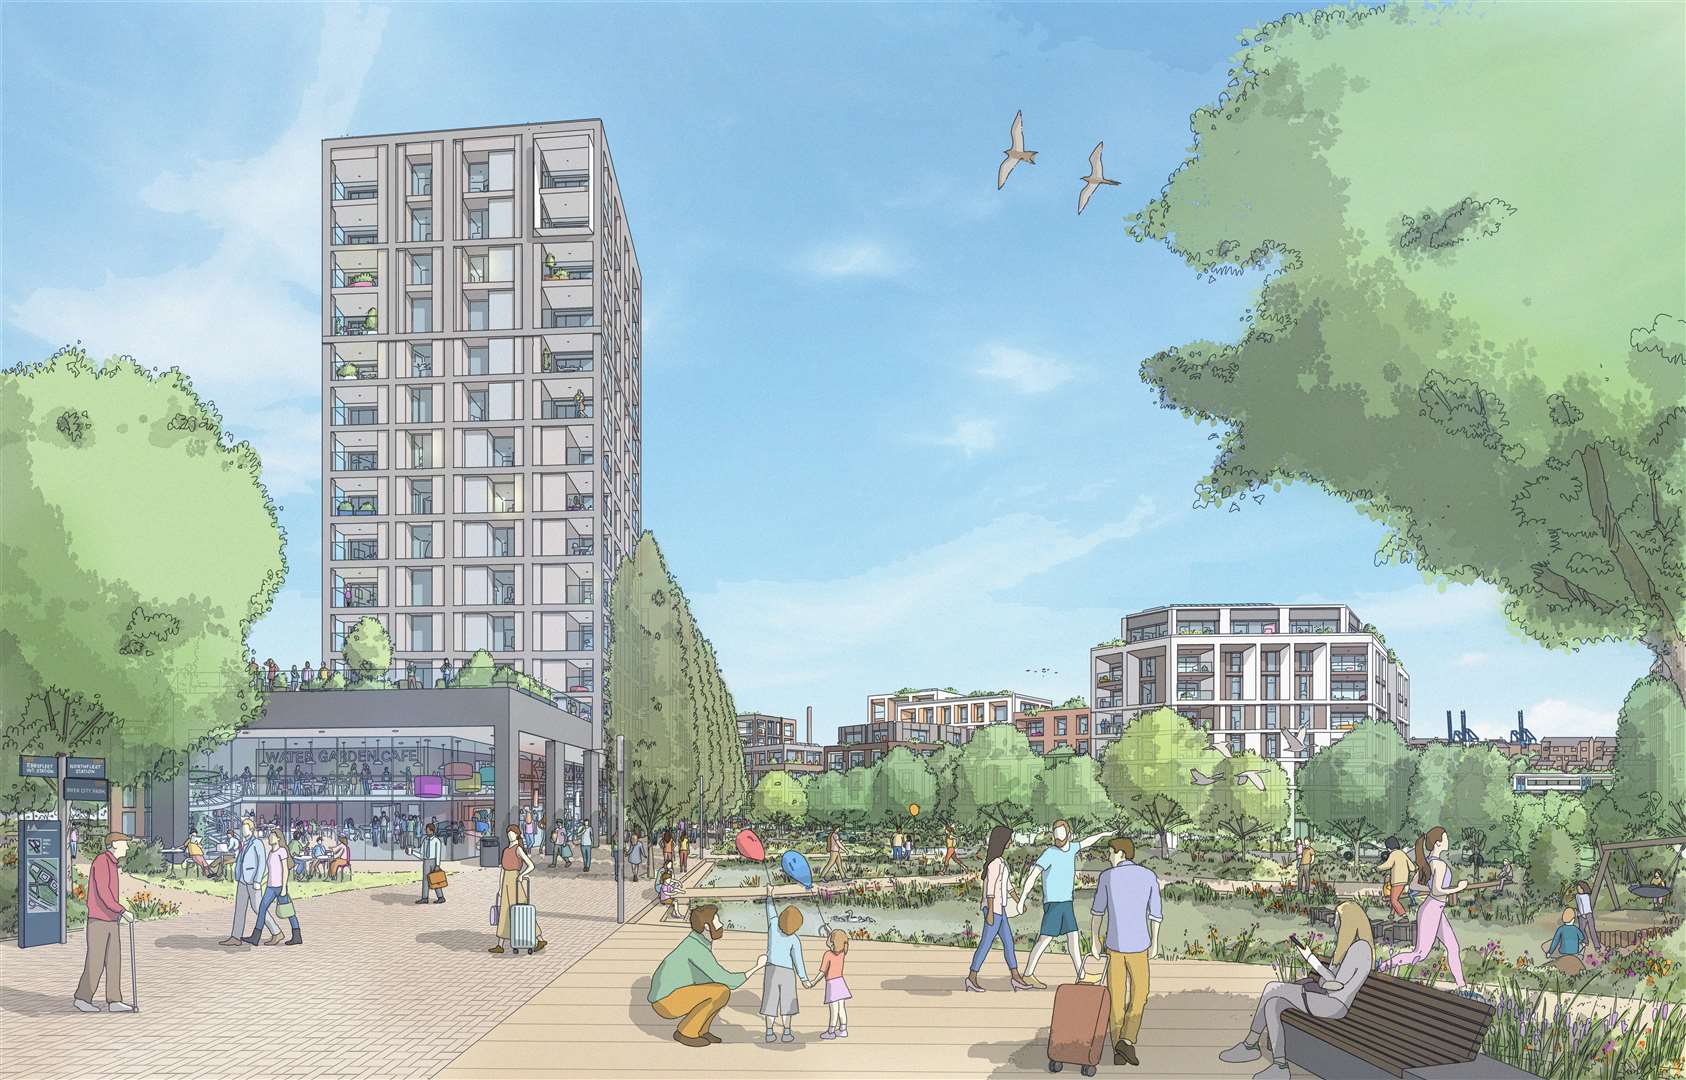 Plans unveiled for new garden city centre at Ebbsfleet with 2,100 homes and more than 110,000sq m of commercial, retail and community space